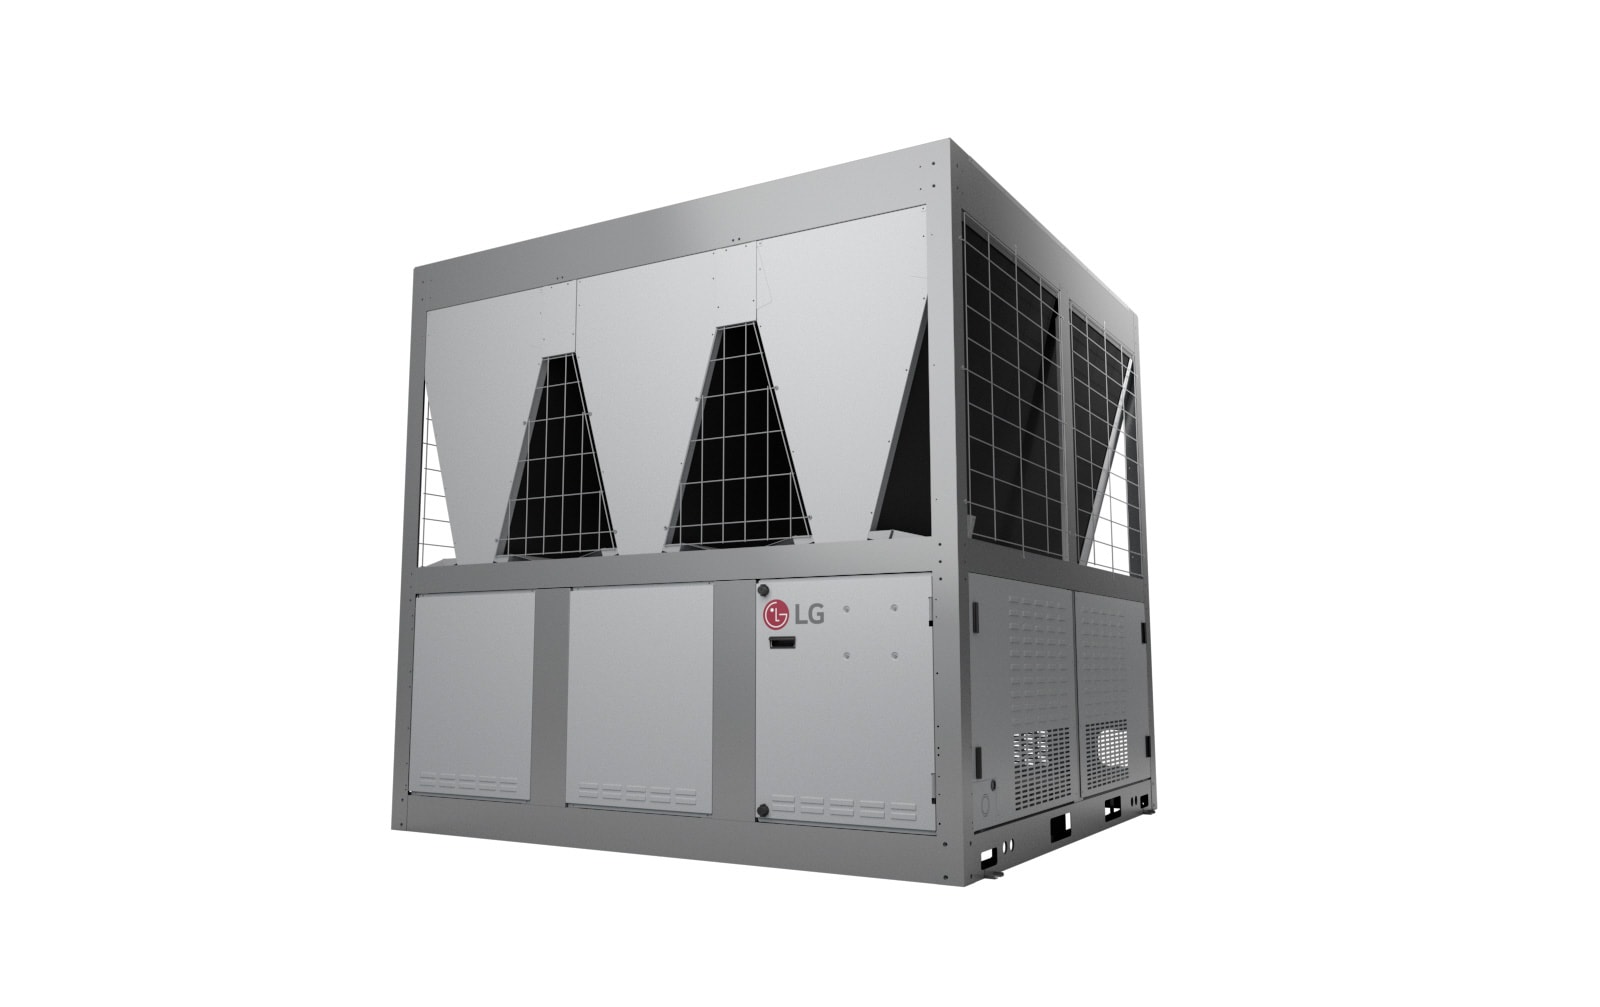 LG secured a significant contract to supply chillers